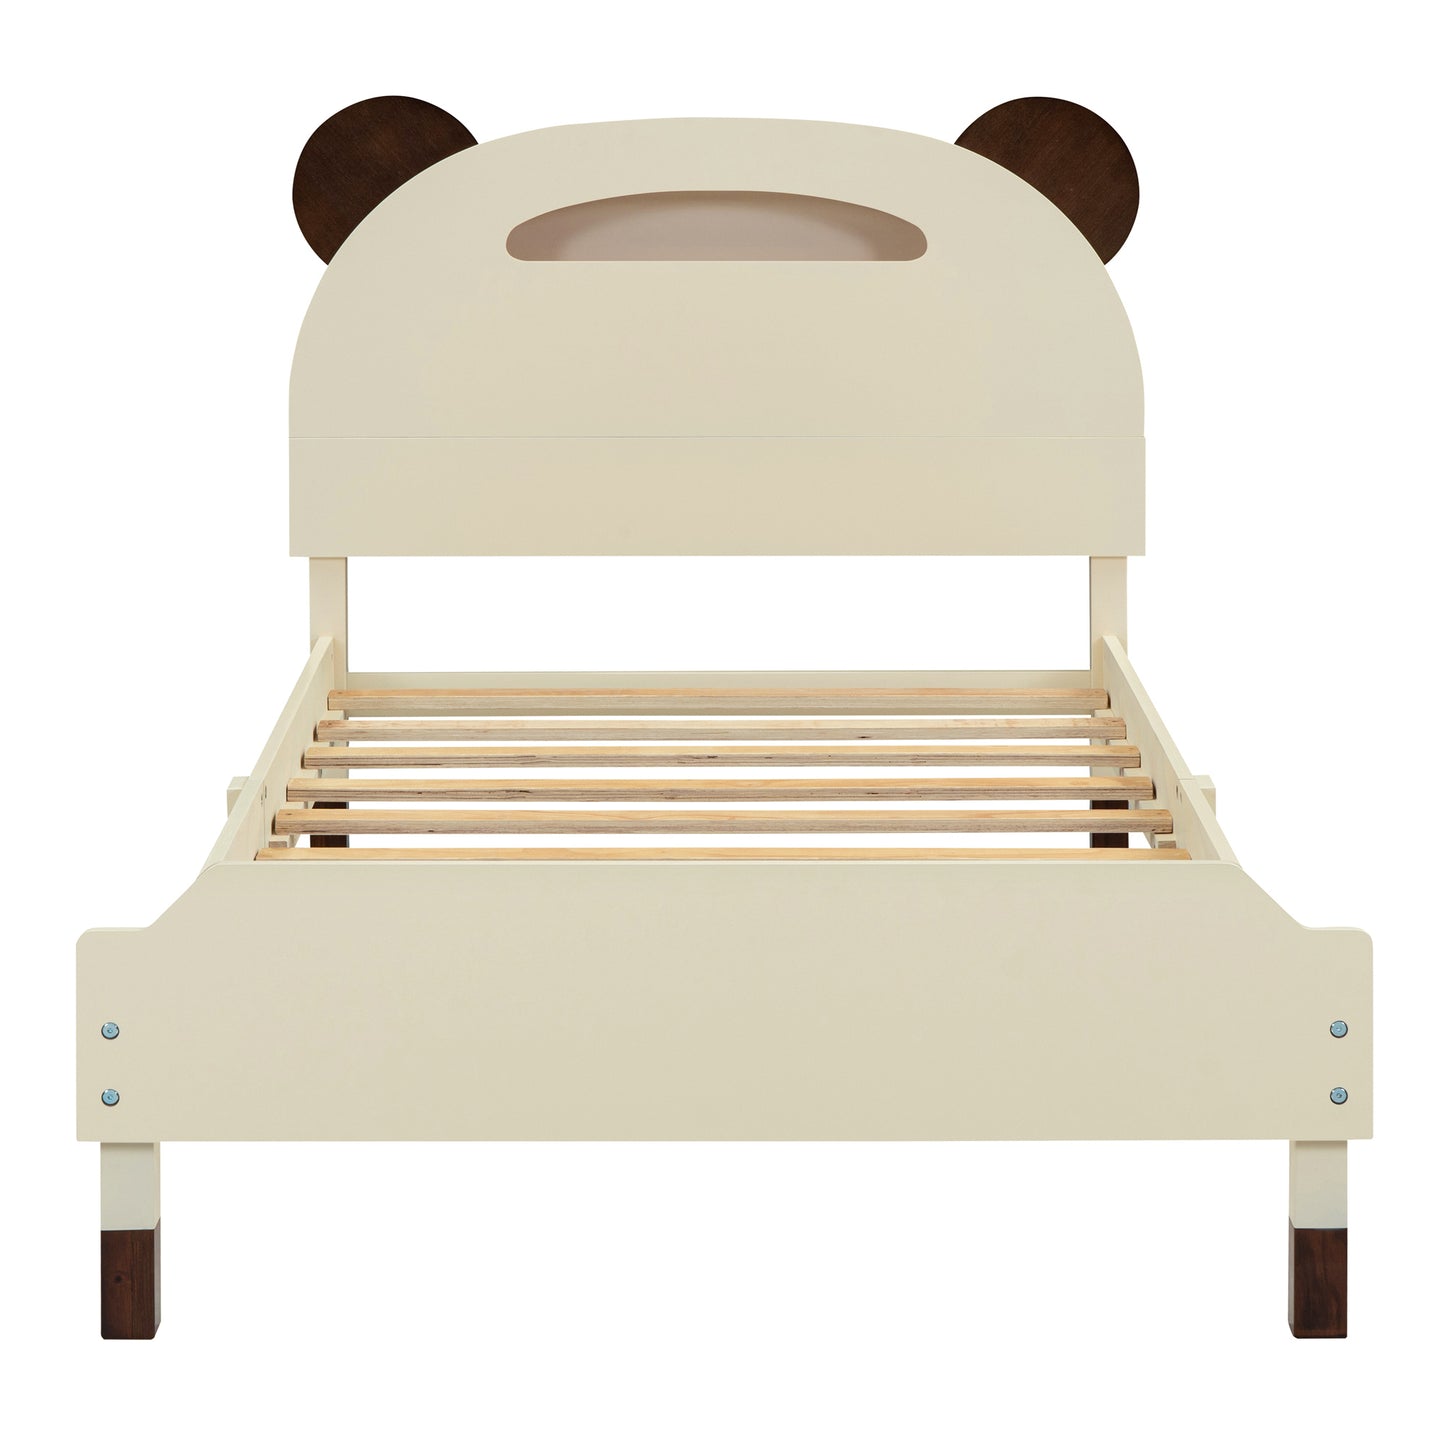 Twin Size Wood Platform Bed with Bear-shaped Headboard,Bed with Motion Activated Night Lights,Cream+Walnut